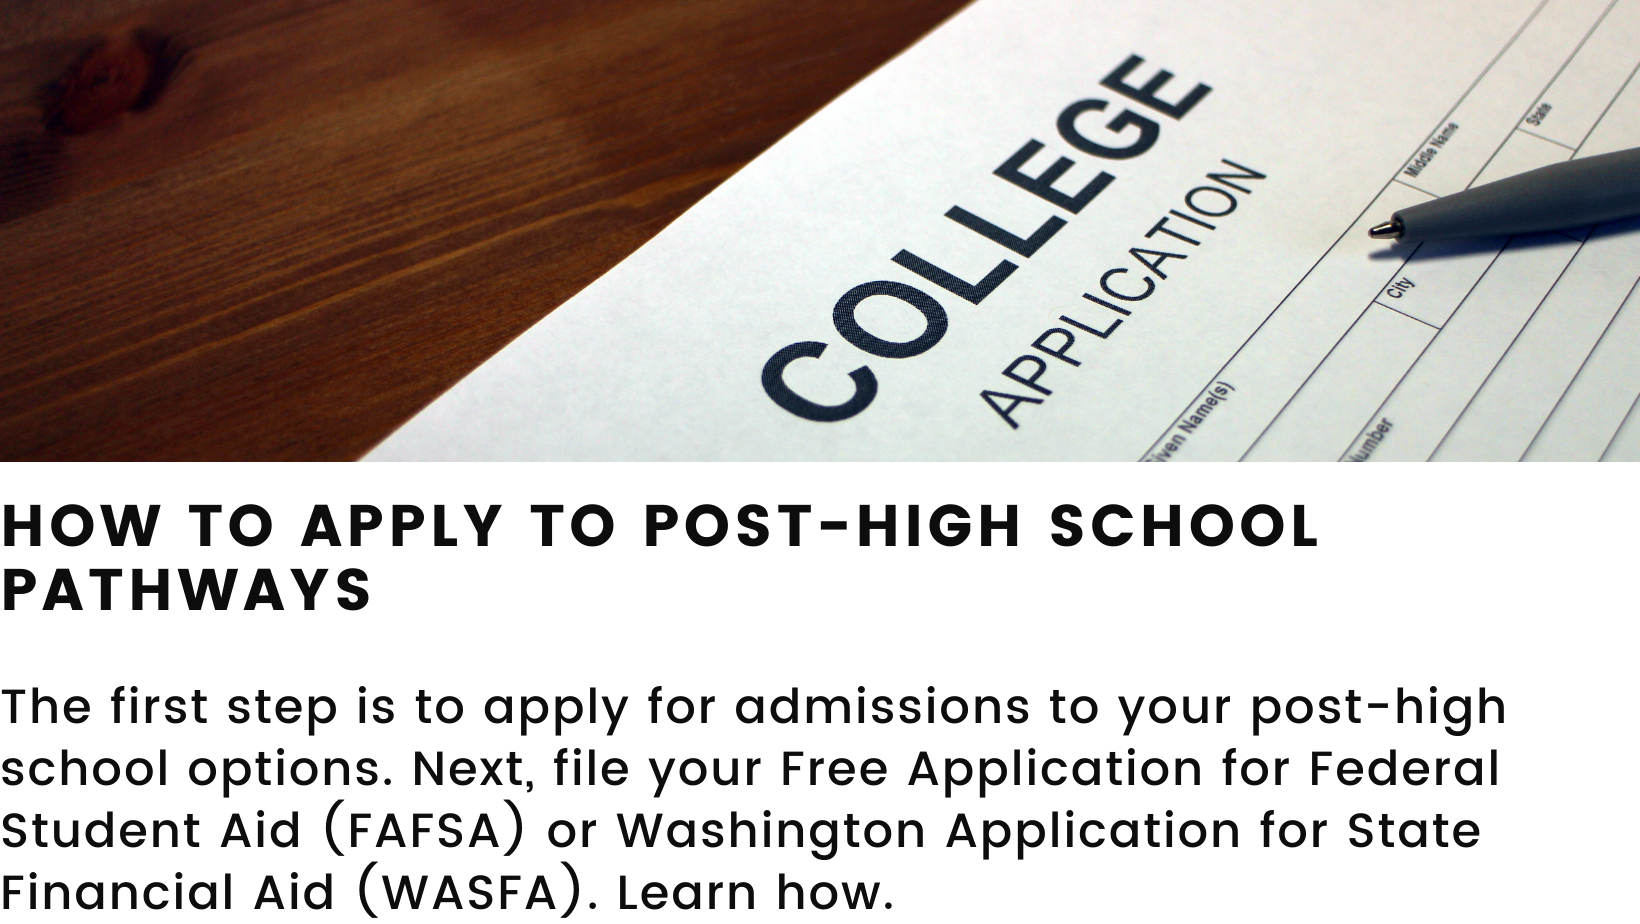 Features a decorative picture of a college application. Heading: how to apply to post-high school pathways. Body: The first step is to apply for admissions to your post-high school options. Next, file your Free Application for Federal Student Aid (FAFSA) or Washington Application for State Financial Aid (WASFA). Learn how.